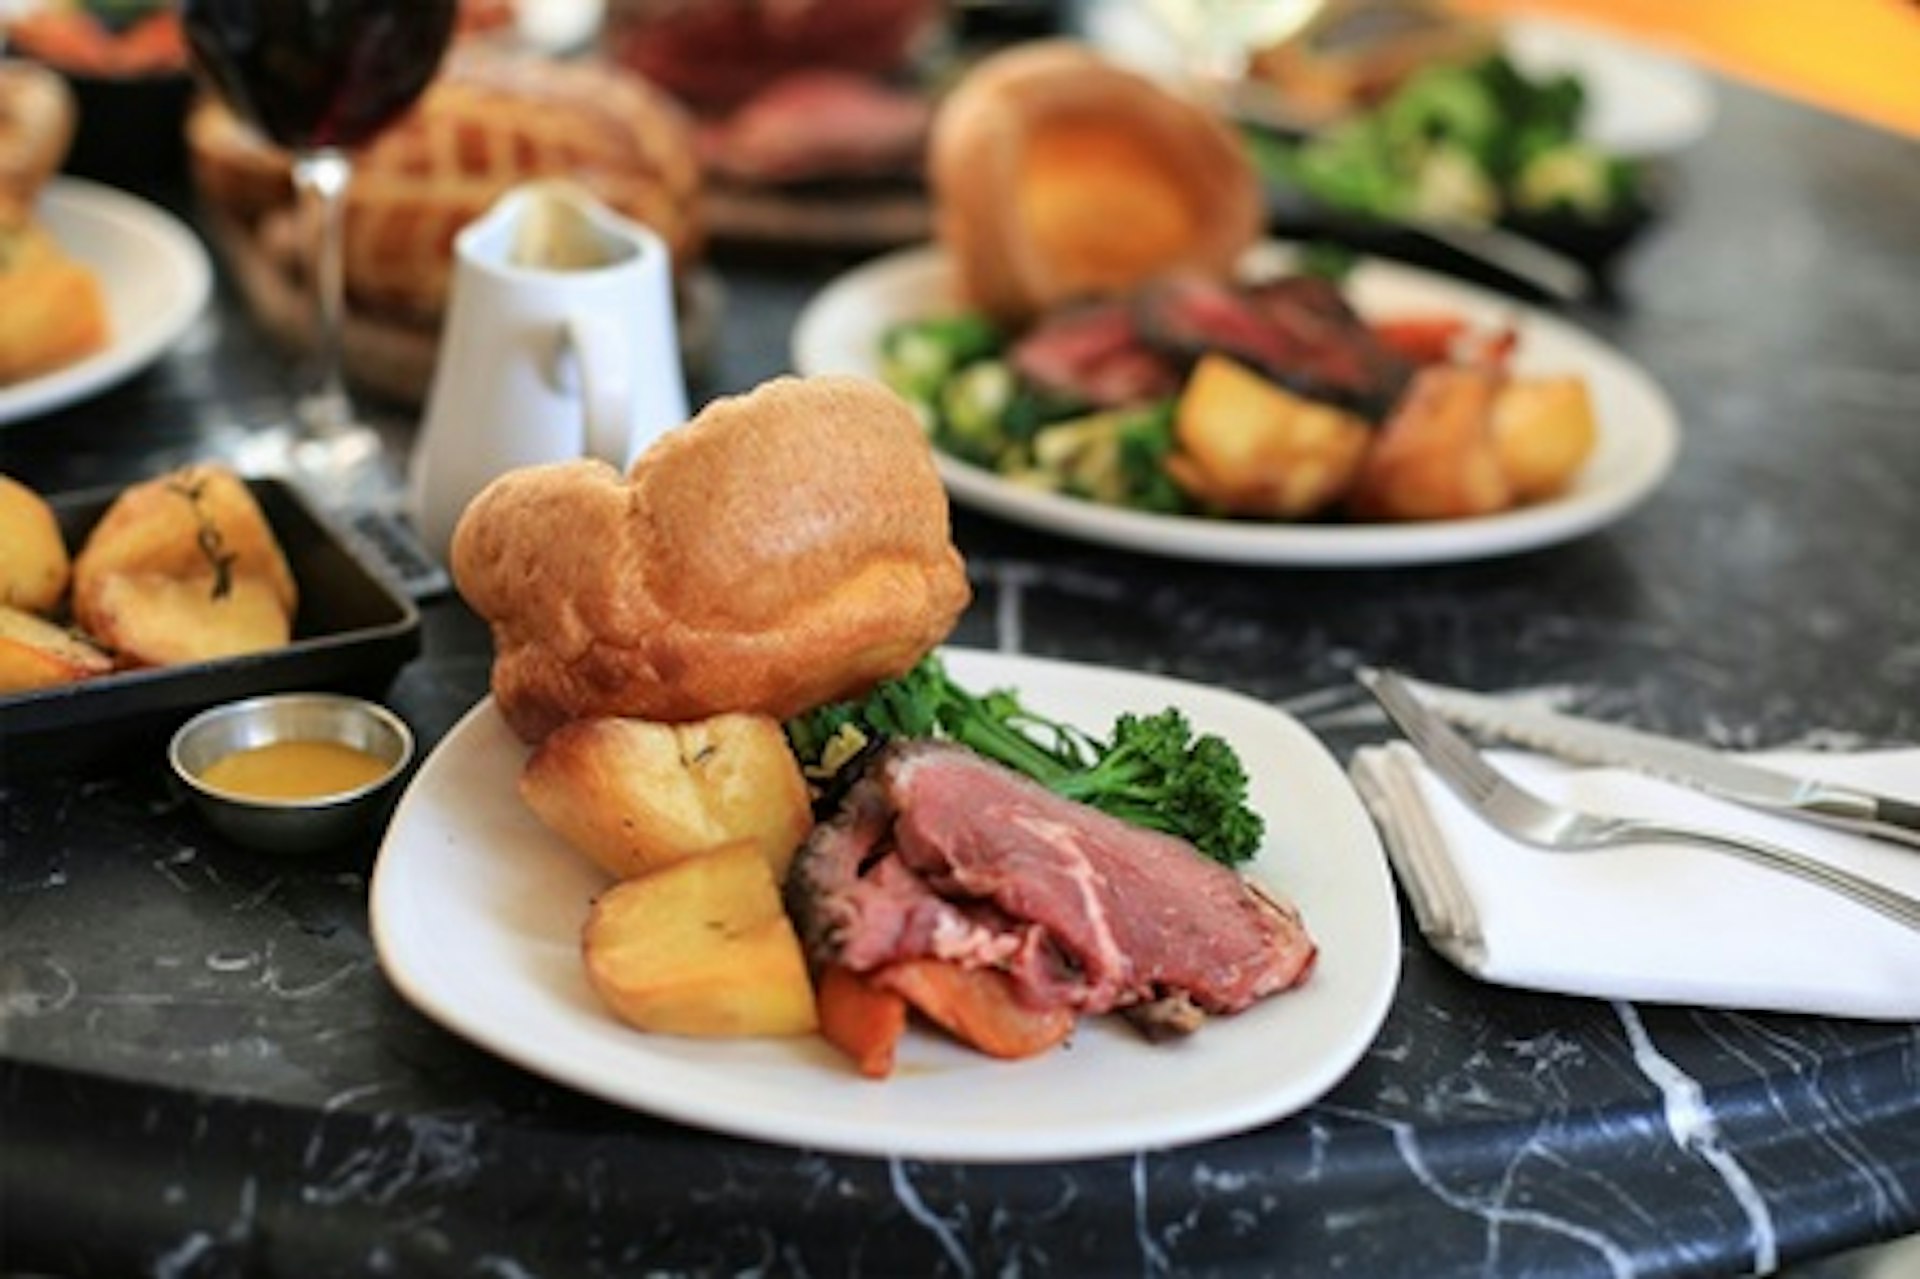 Sunday Roast for Two at a Gordon Ramsay Restaurant 2